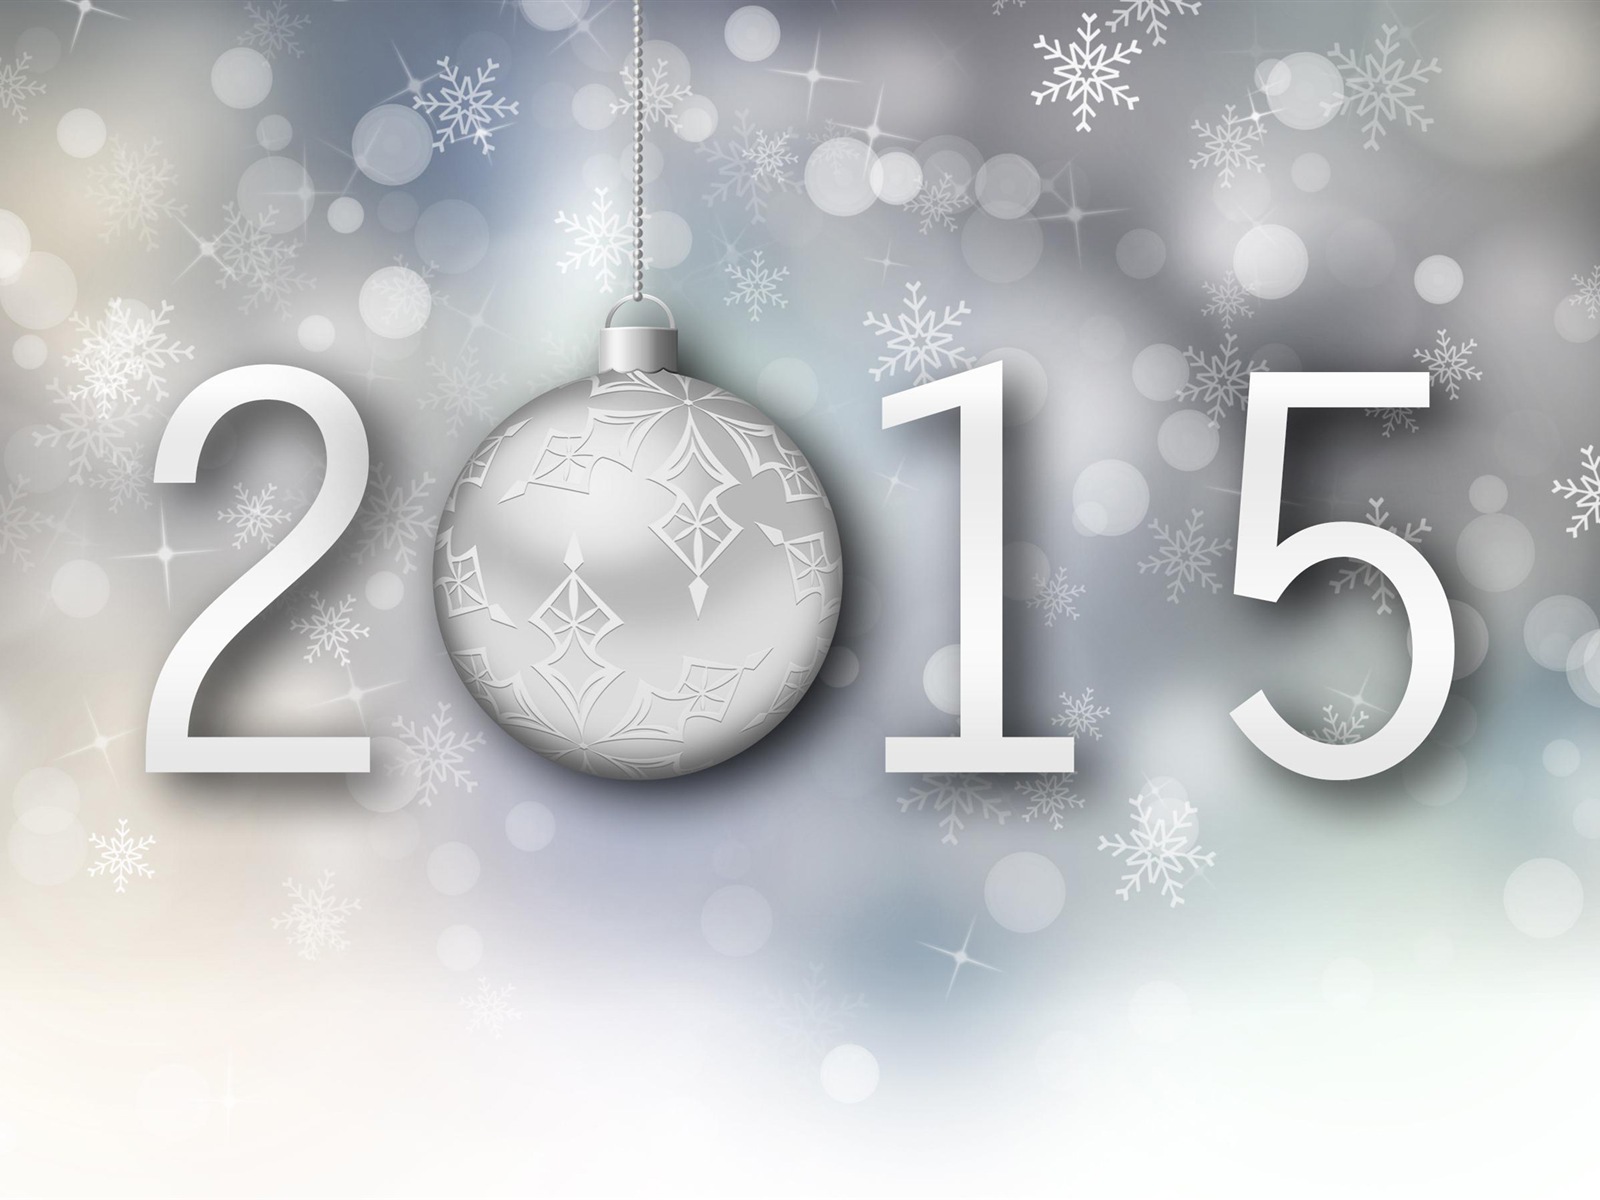 2015 New Year theme HD wallpapers (1) #4 - 1600x1200